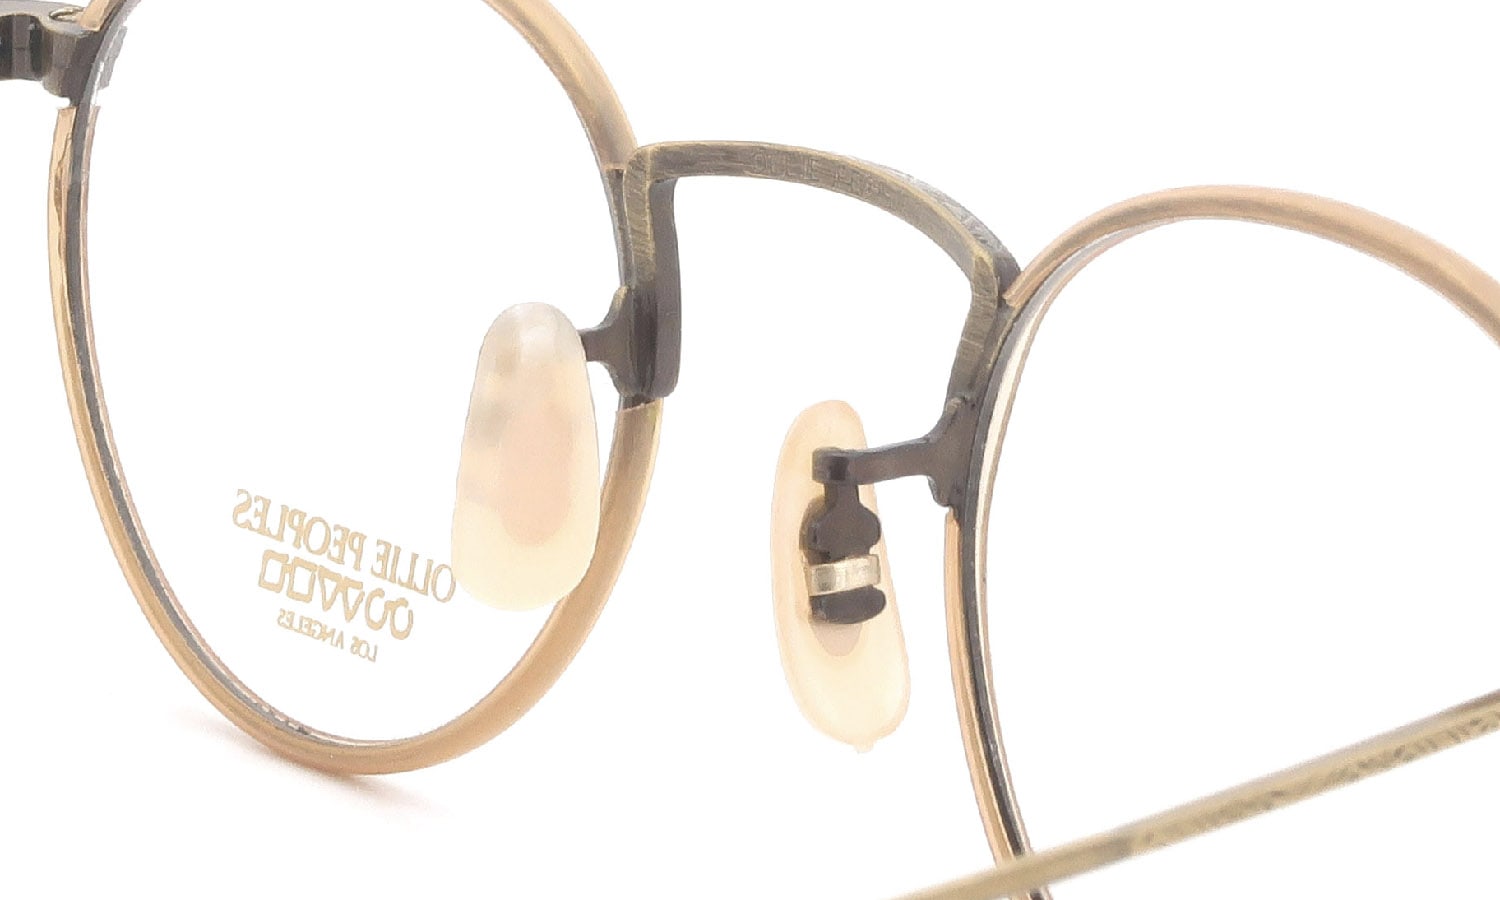 OLIVER PEOPLES Archive 1990's Souse RB-AG